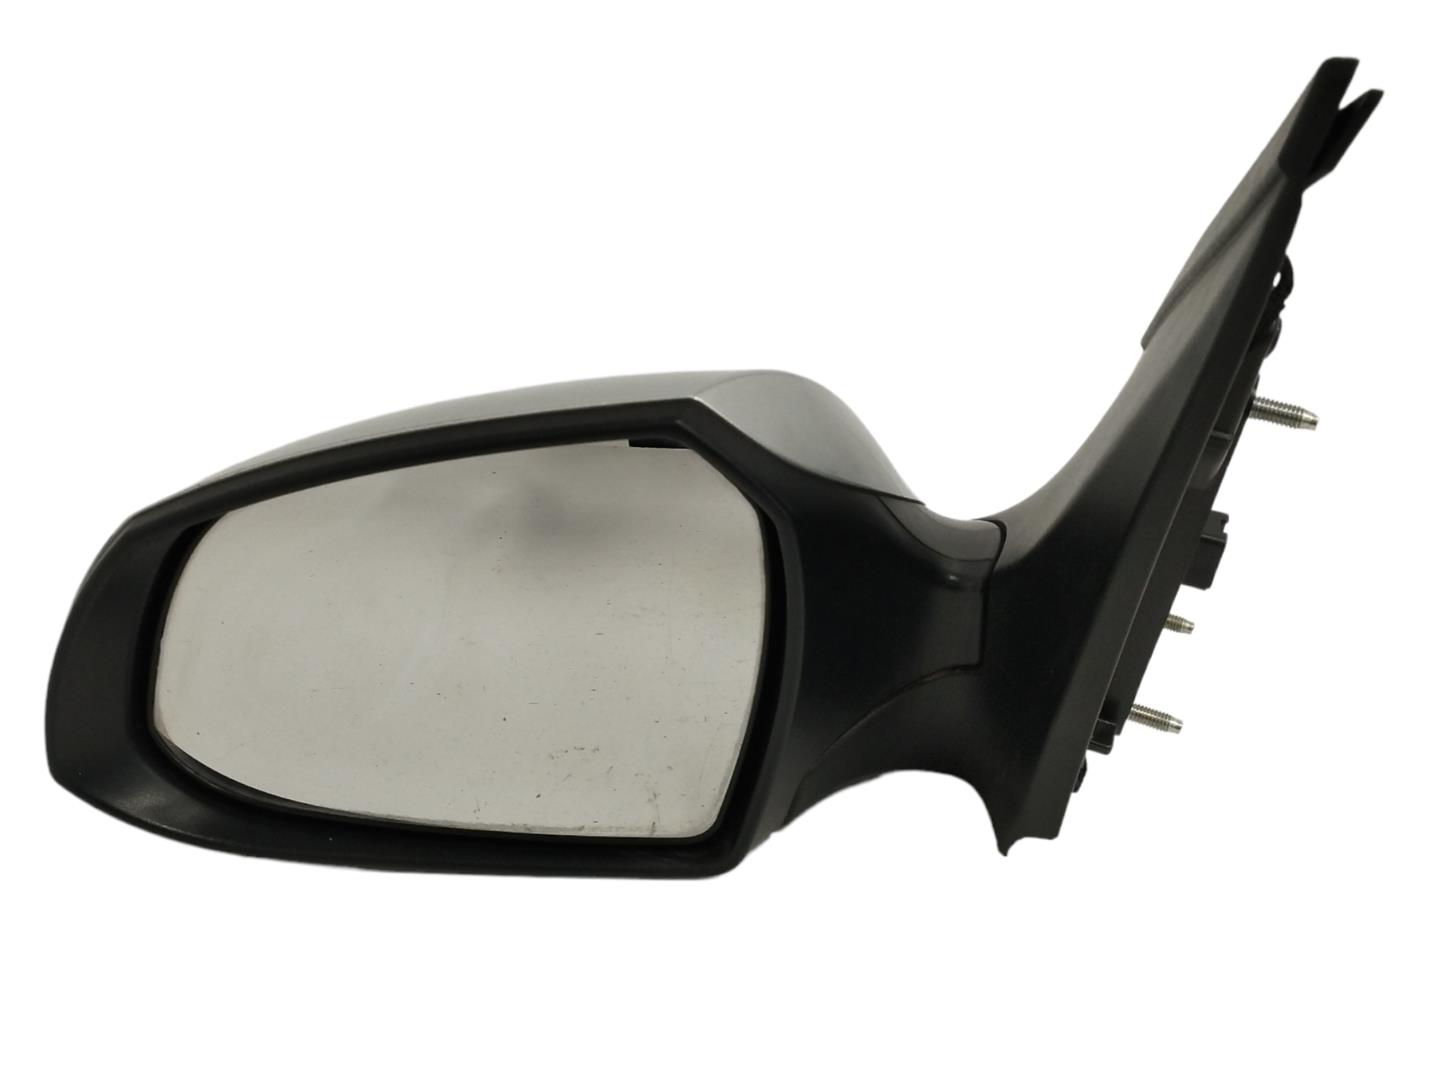 HYUNDAI i10 2 generation (2013-2019) Left Side Wing Mirror 87617B9010, 5CABLES 22785822